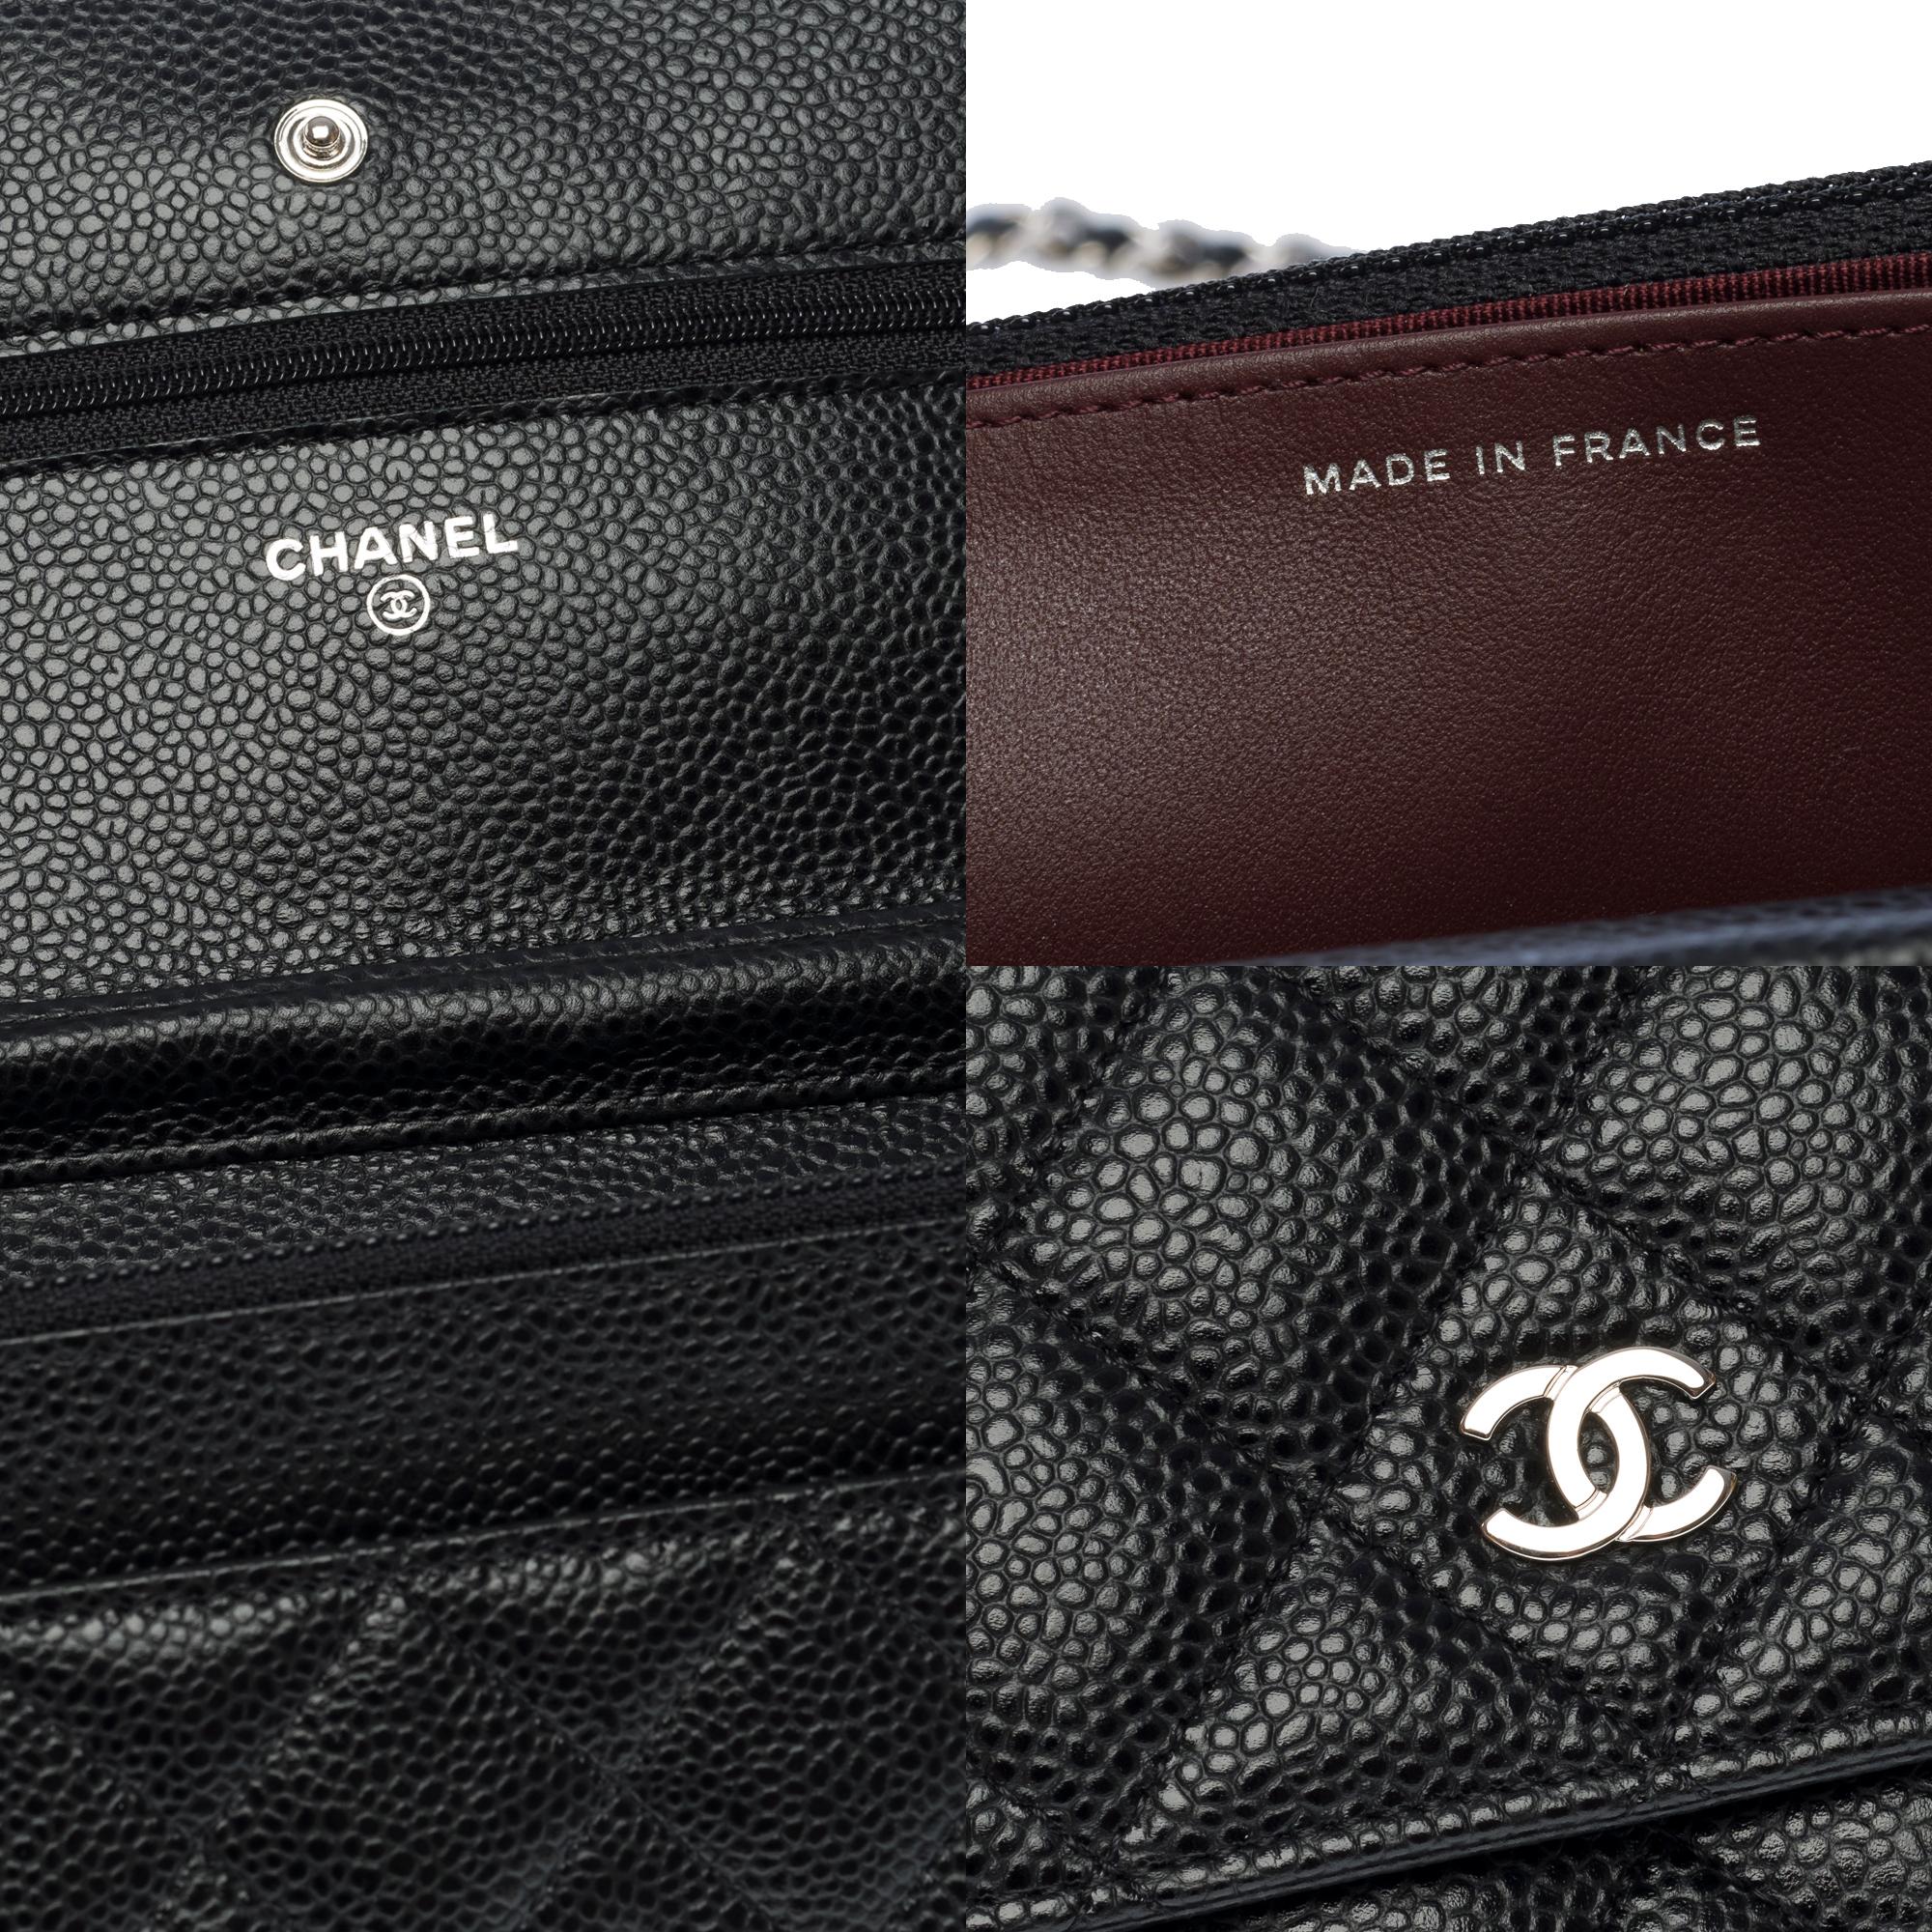 Chanel Wallet on Chain (WOC)  shoulder bag in black Caviar quilted leather, SHW 2